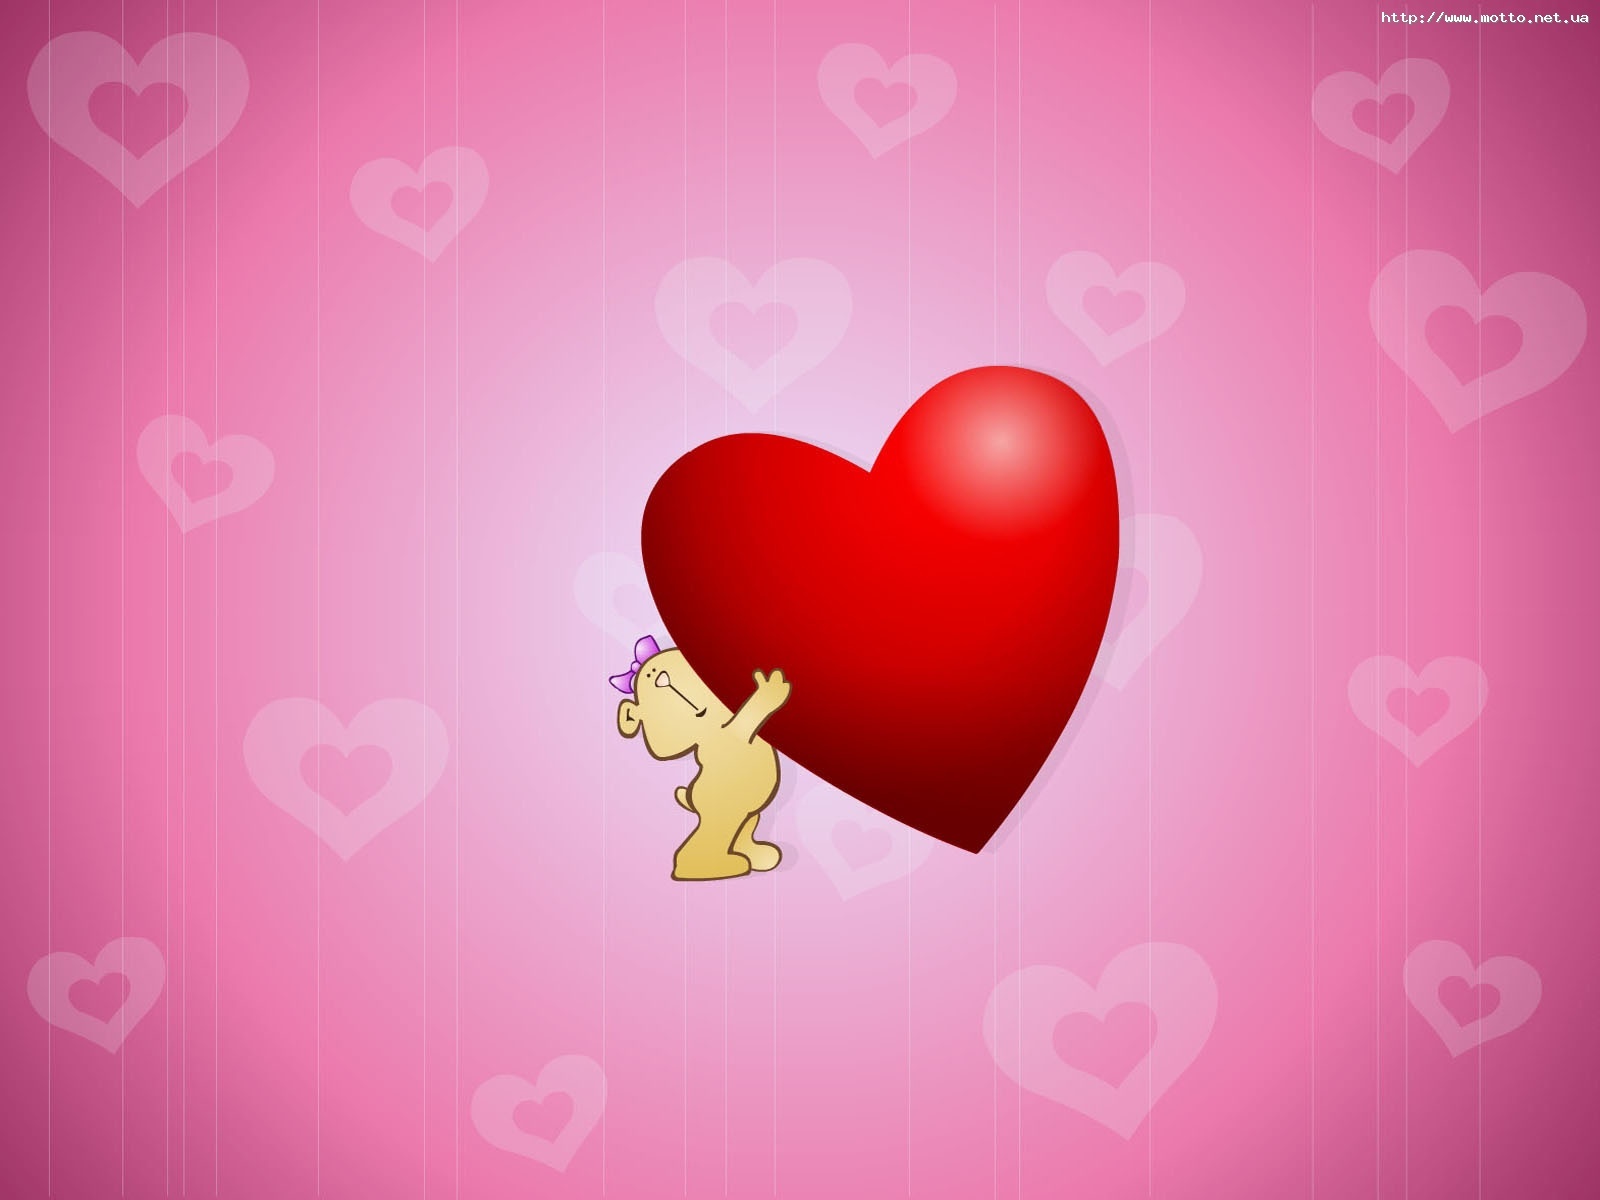 Cool Wallpapers love, holidays, hearts, valentine's day, pictures, red